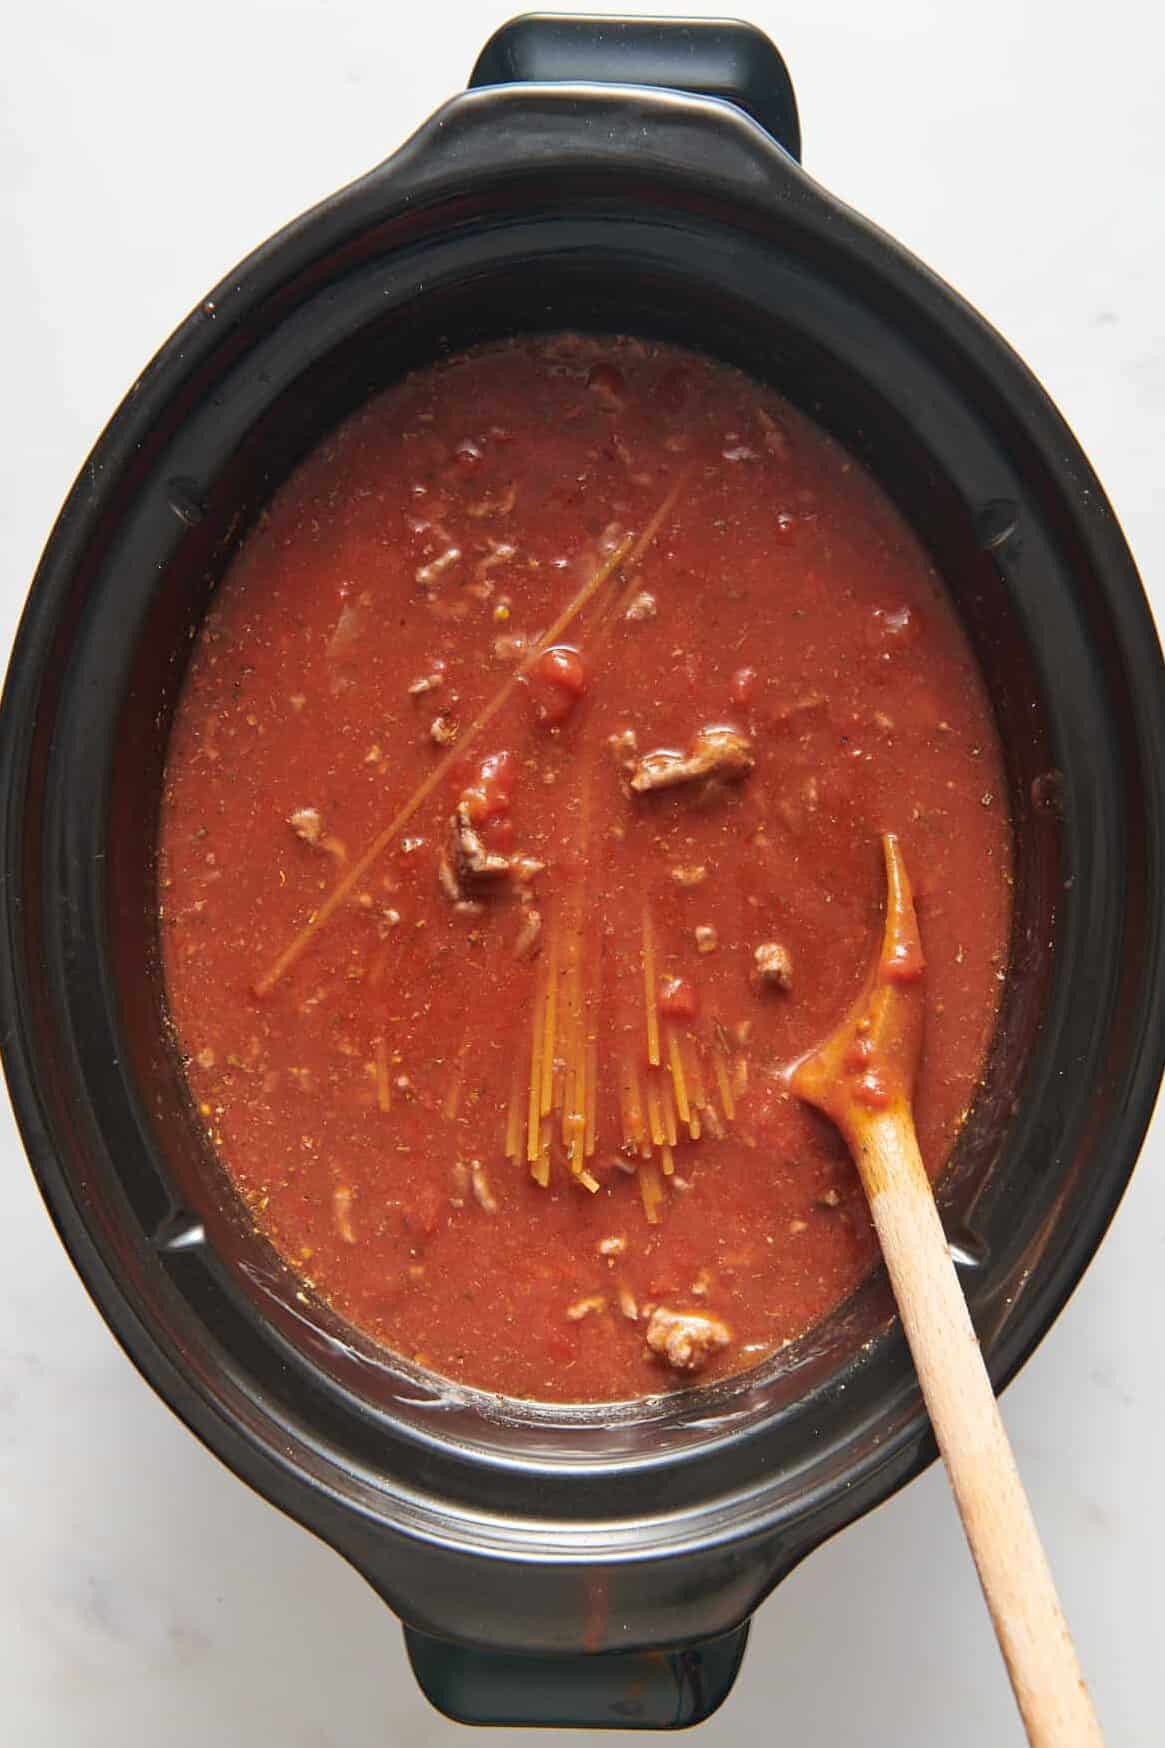 top down image of uncooked spaghetti added to the crock pot with tomato sauce and cooked ground beef. 